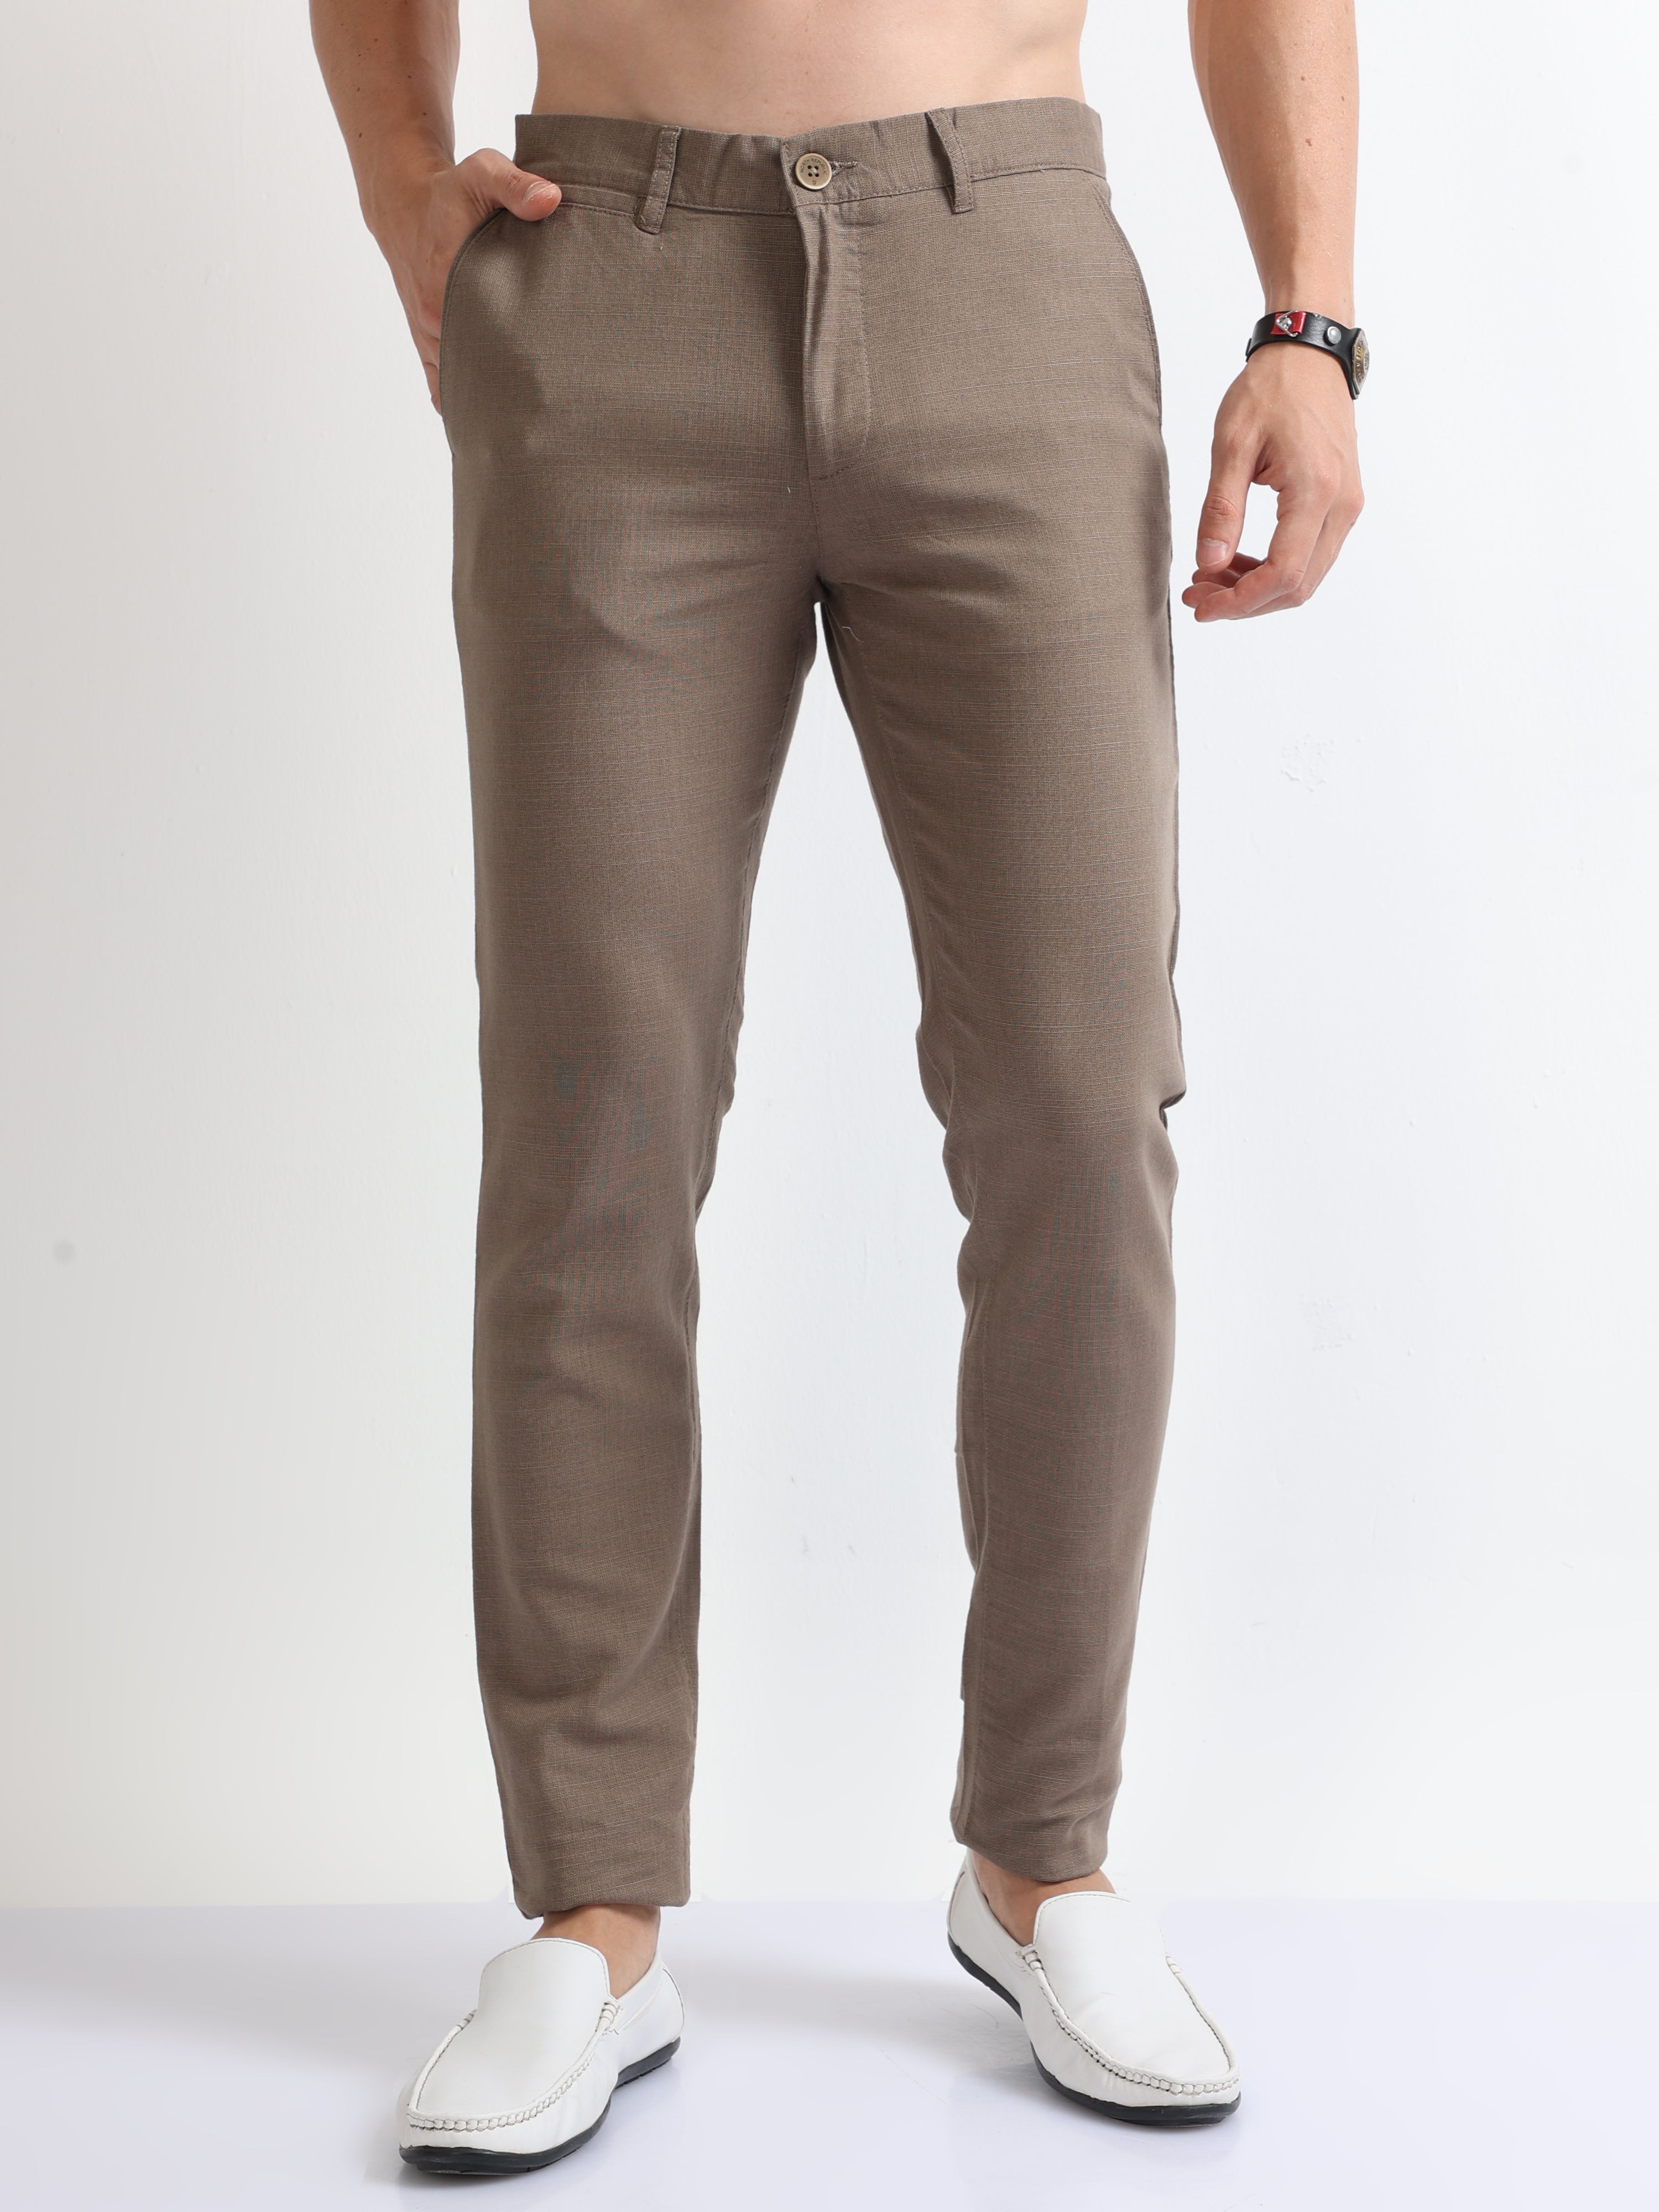 Blue Grey Chambray Cotton Trousers For Men – Genes Online Store